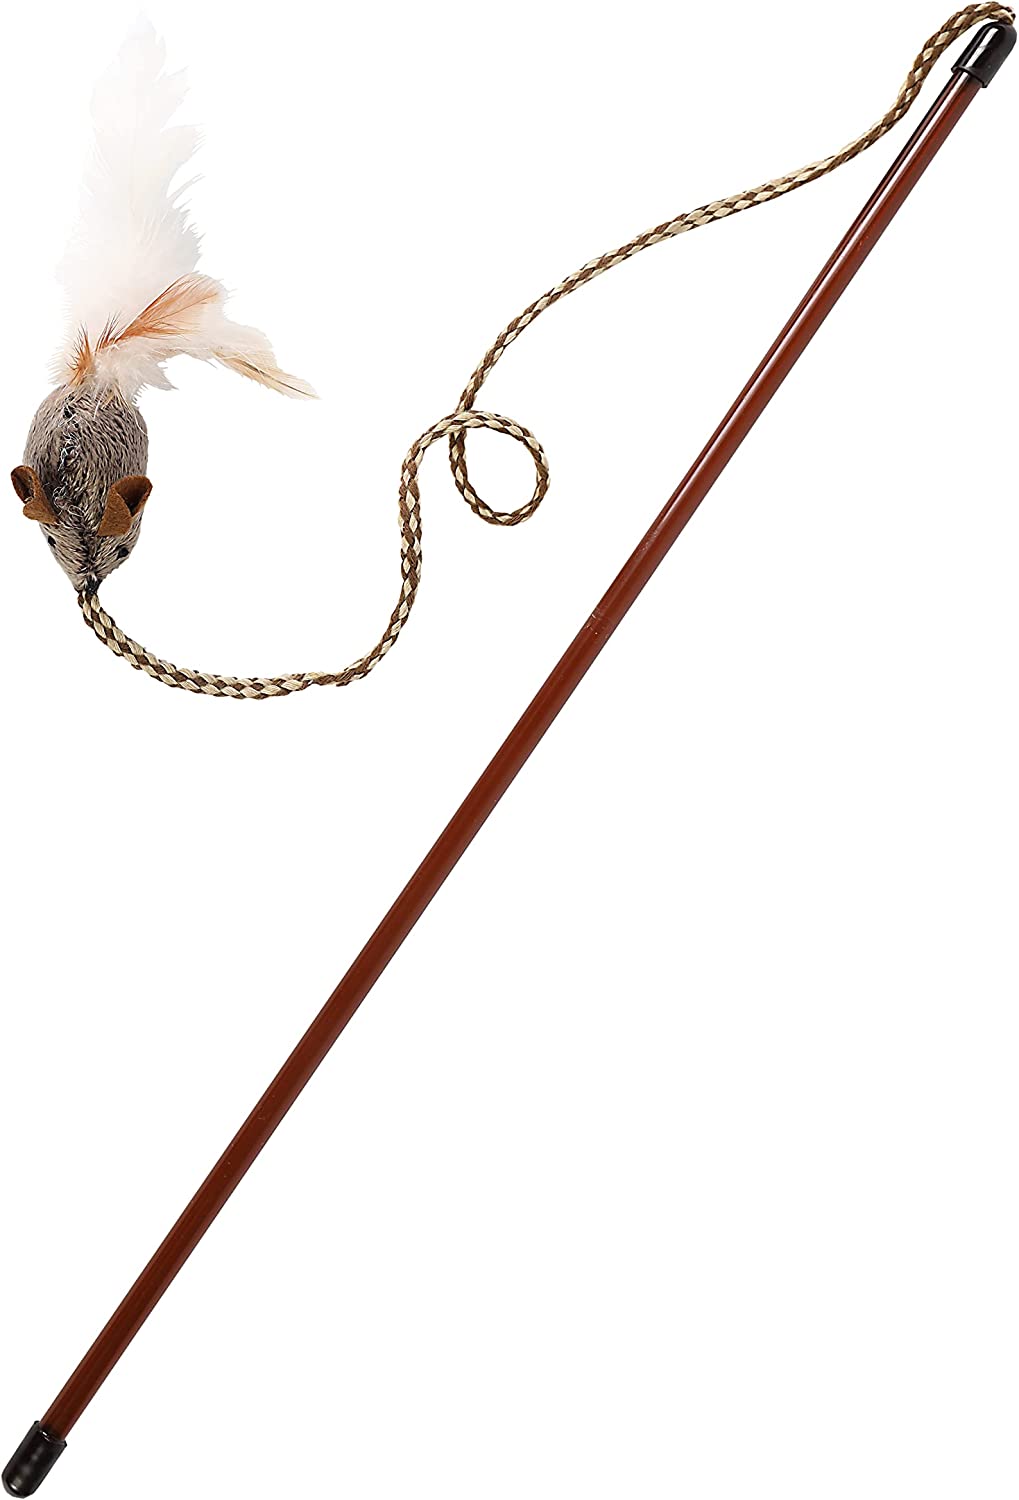 Our Pet's Play Wand Tethered & Feathered